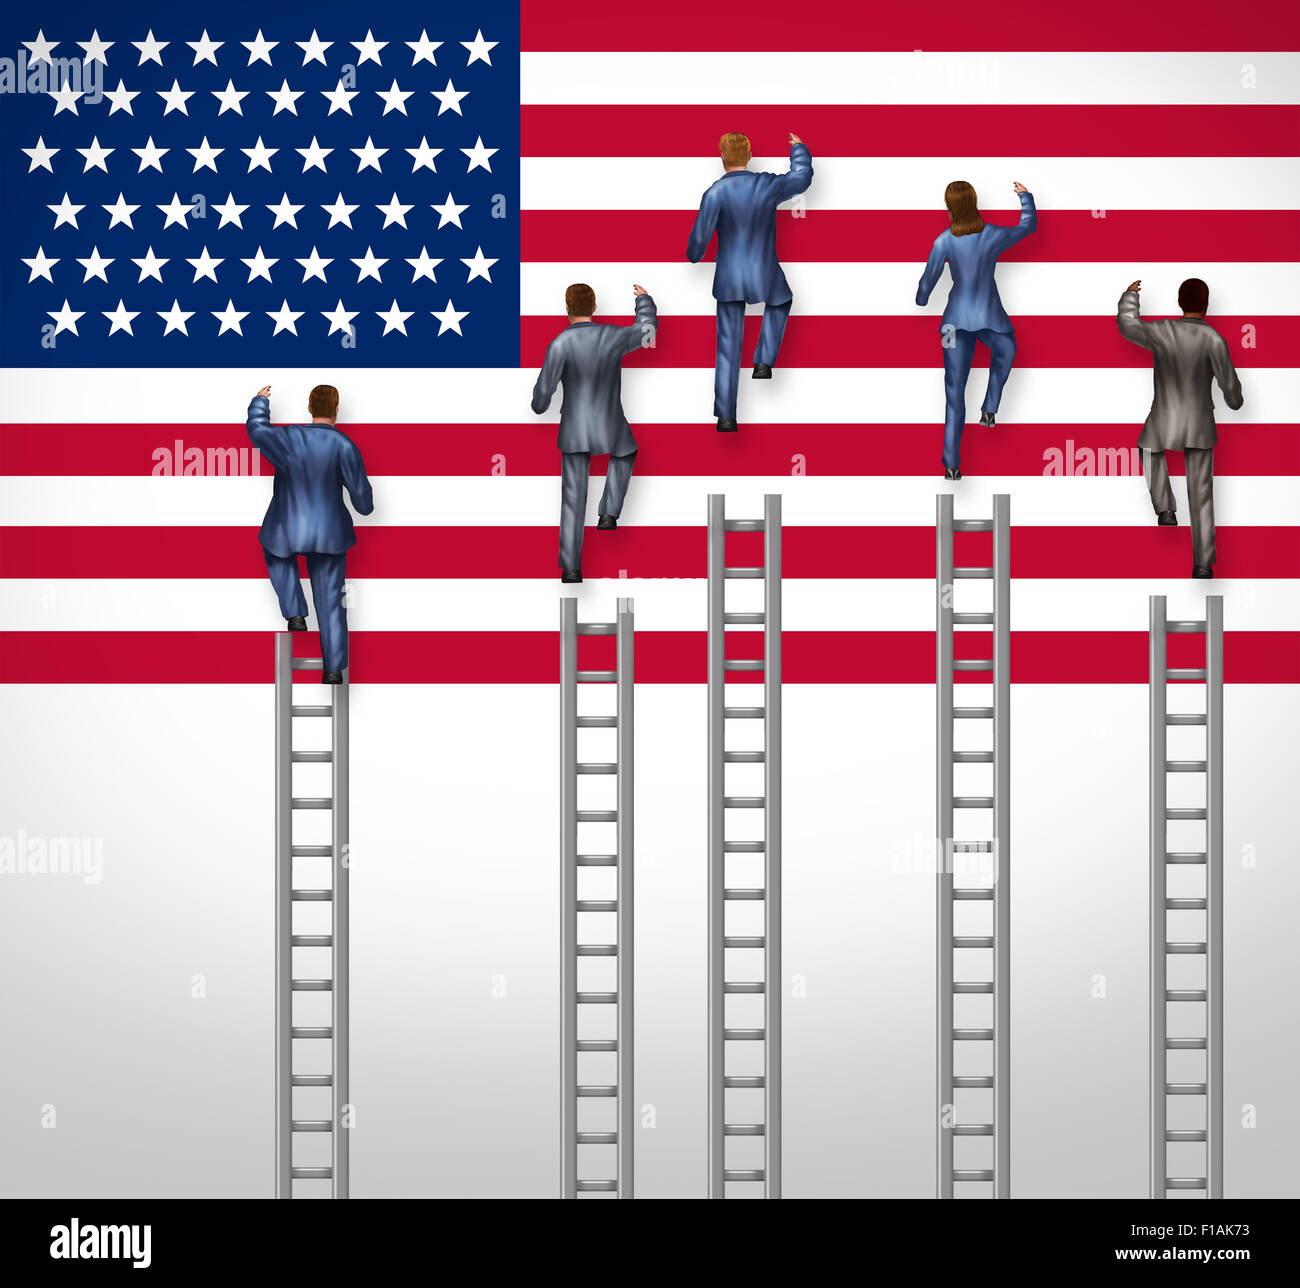 American election concept as a group of candidates from the United States campaigning for president or government elected positi Stock Photo